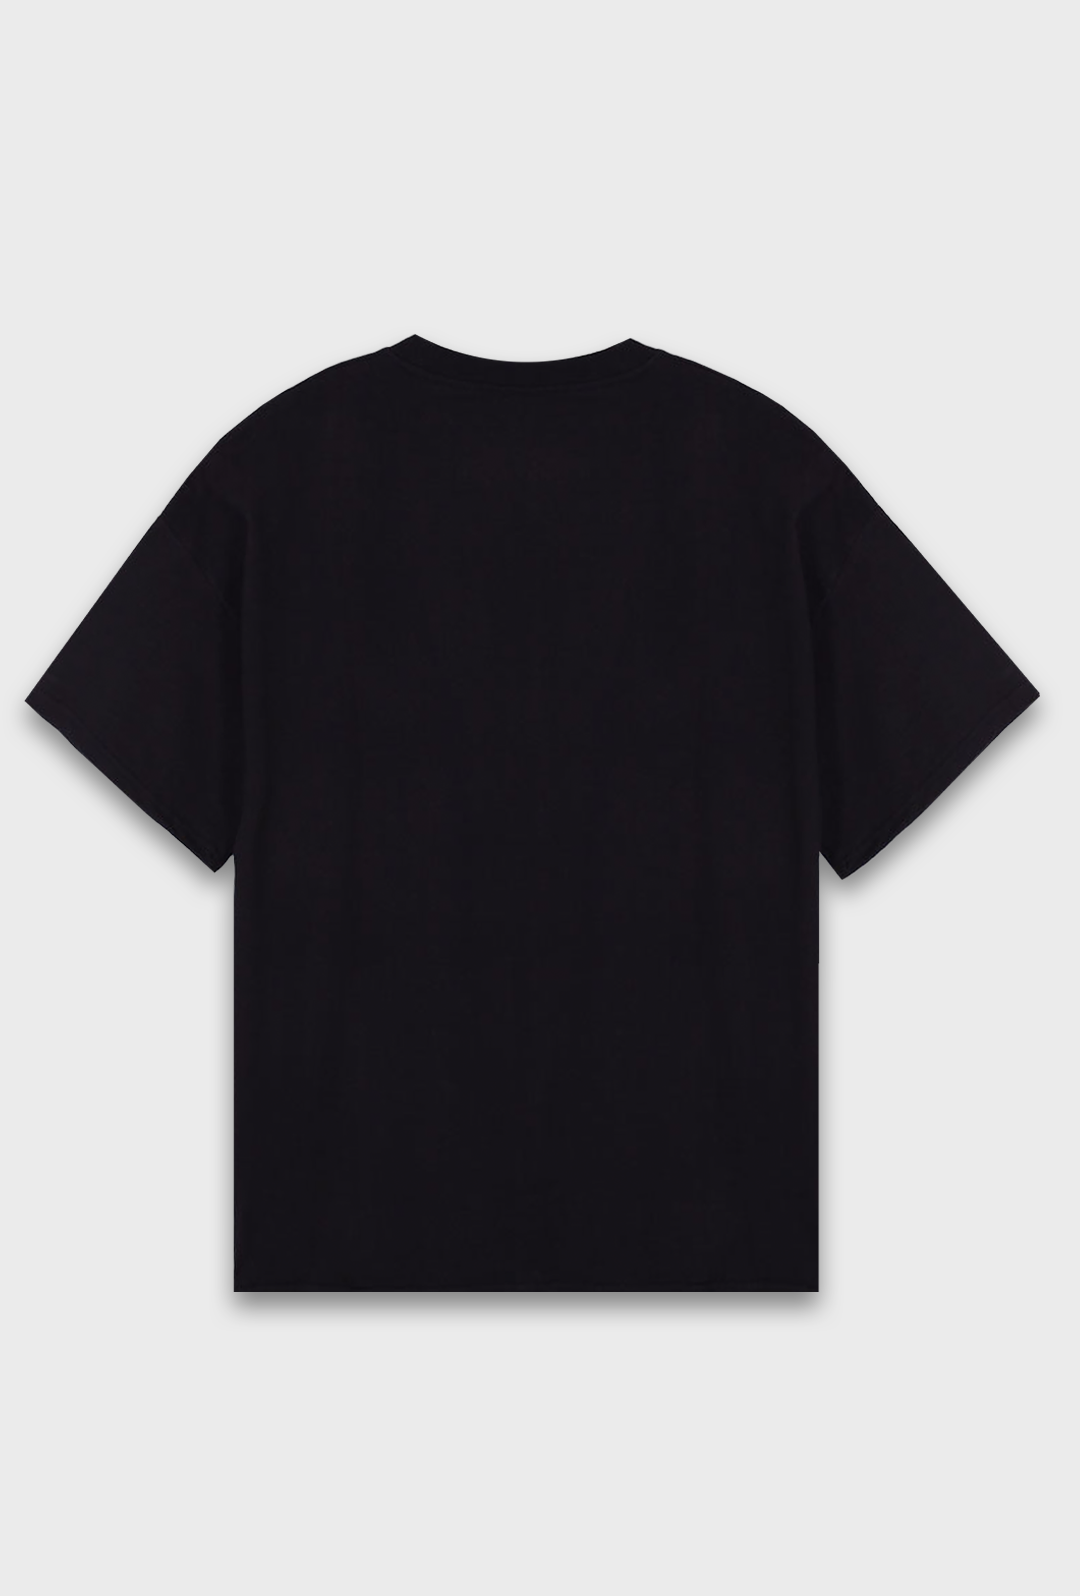 rollr oversized midnight black heavyweight tshirt in french terry organic cotton back